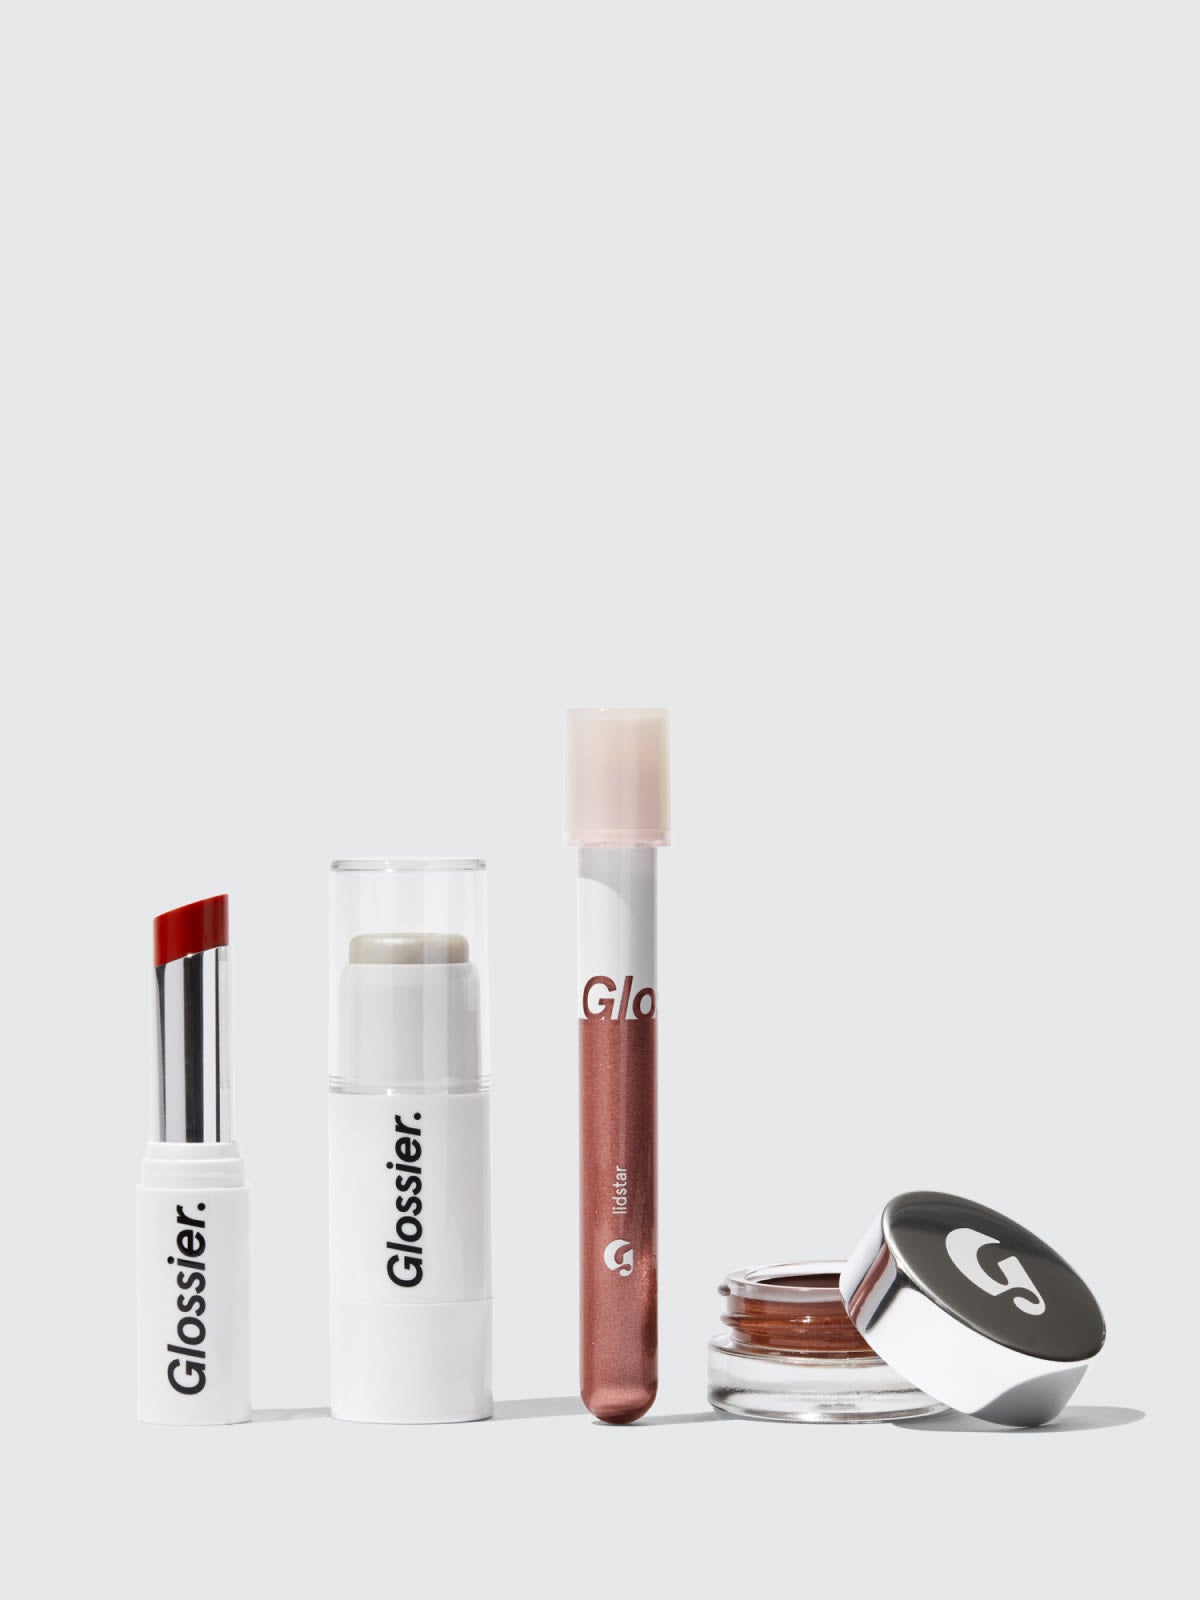 Glossier’s Black Friday Sale Is Actually Starting Now